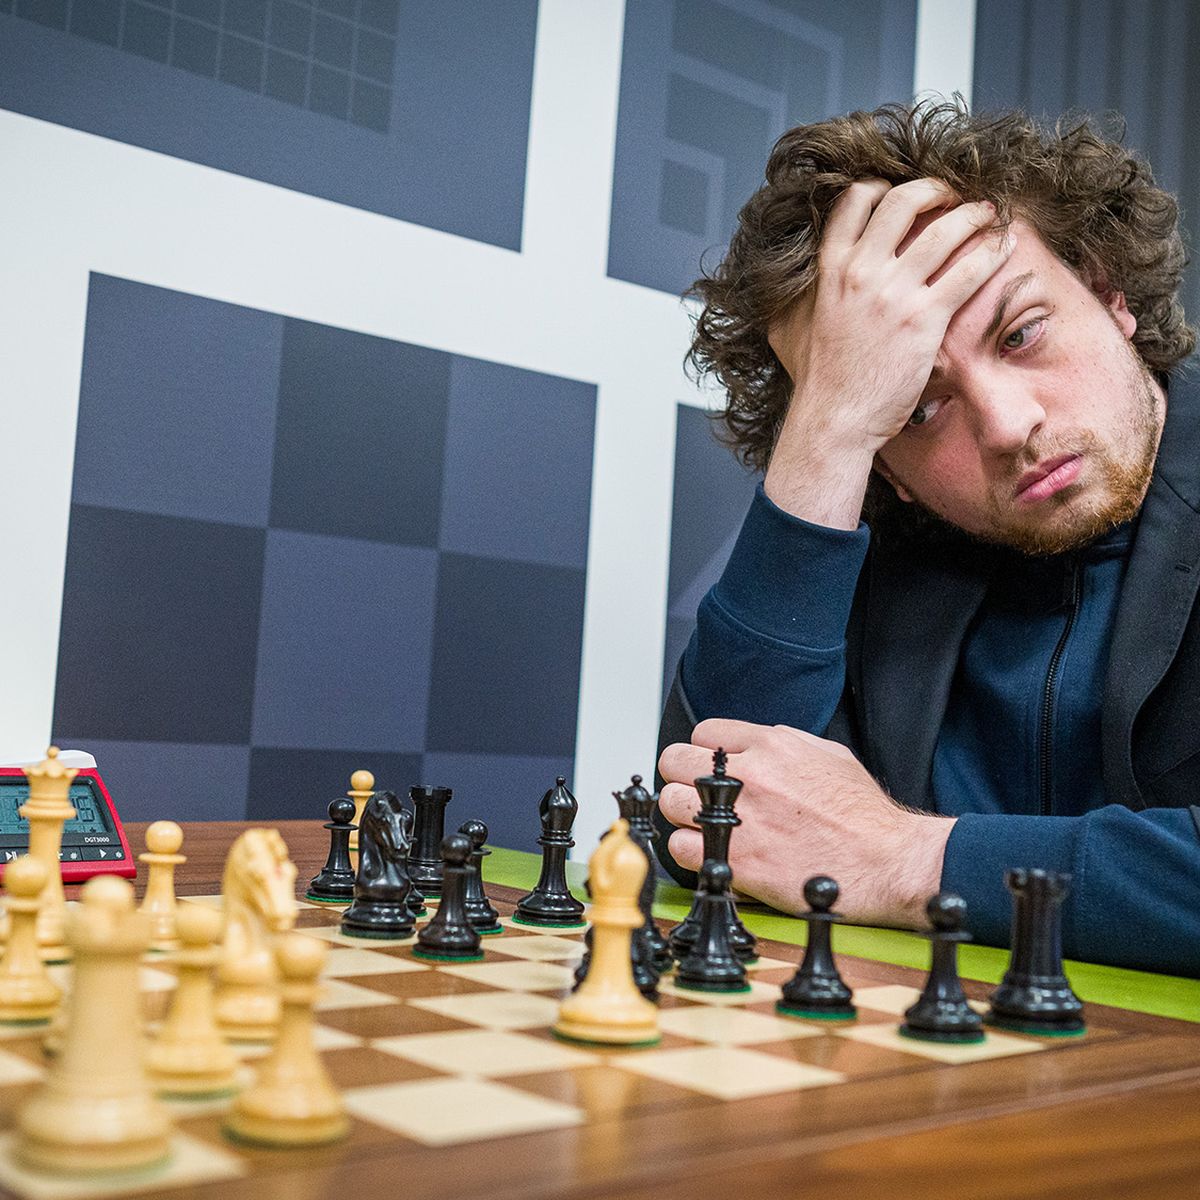 Chess Investigation Finds That U.S. Grandmaster 'Likely Cheated' More Than  100 Times - WSJ